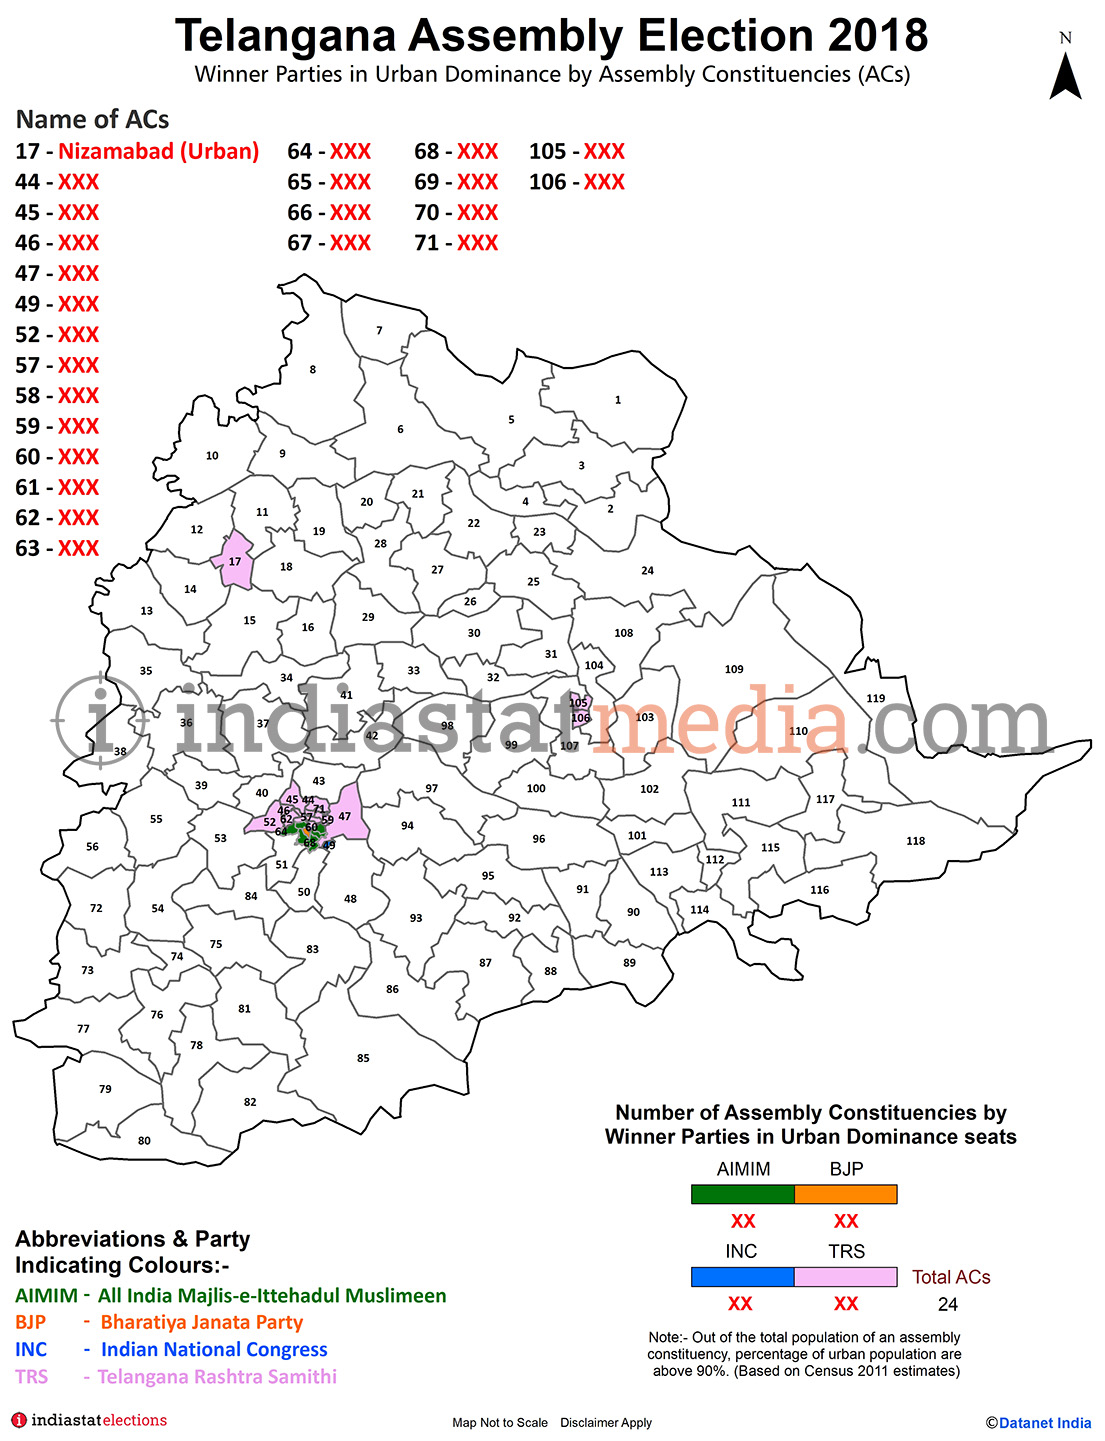 Winner Parties in Urban Dominance Constituencies in Telangana (Assembly Election - 2018)